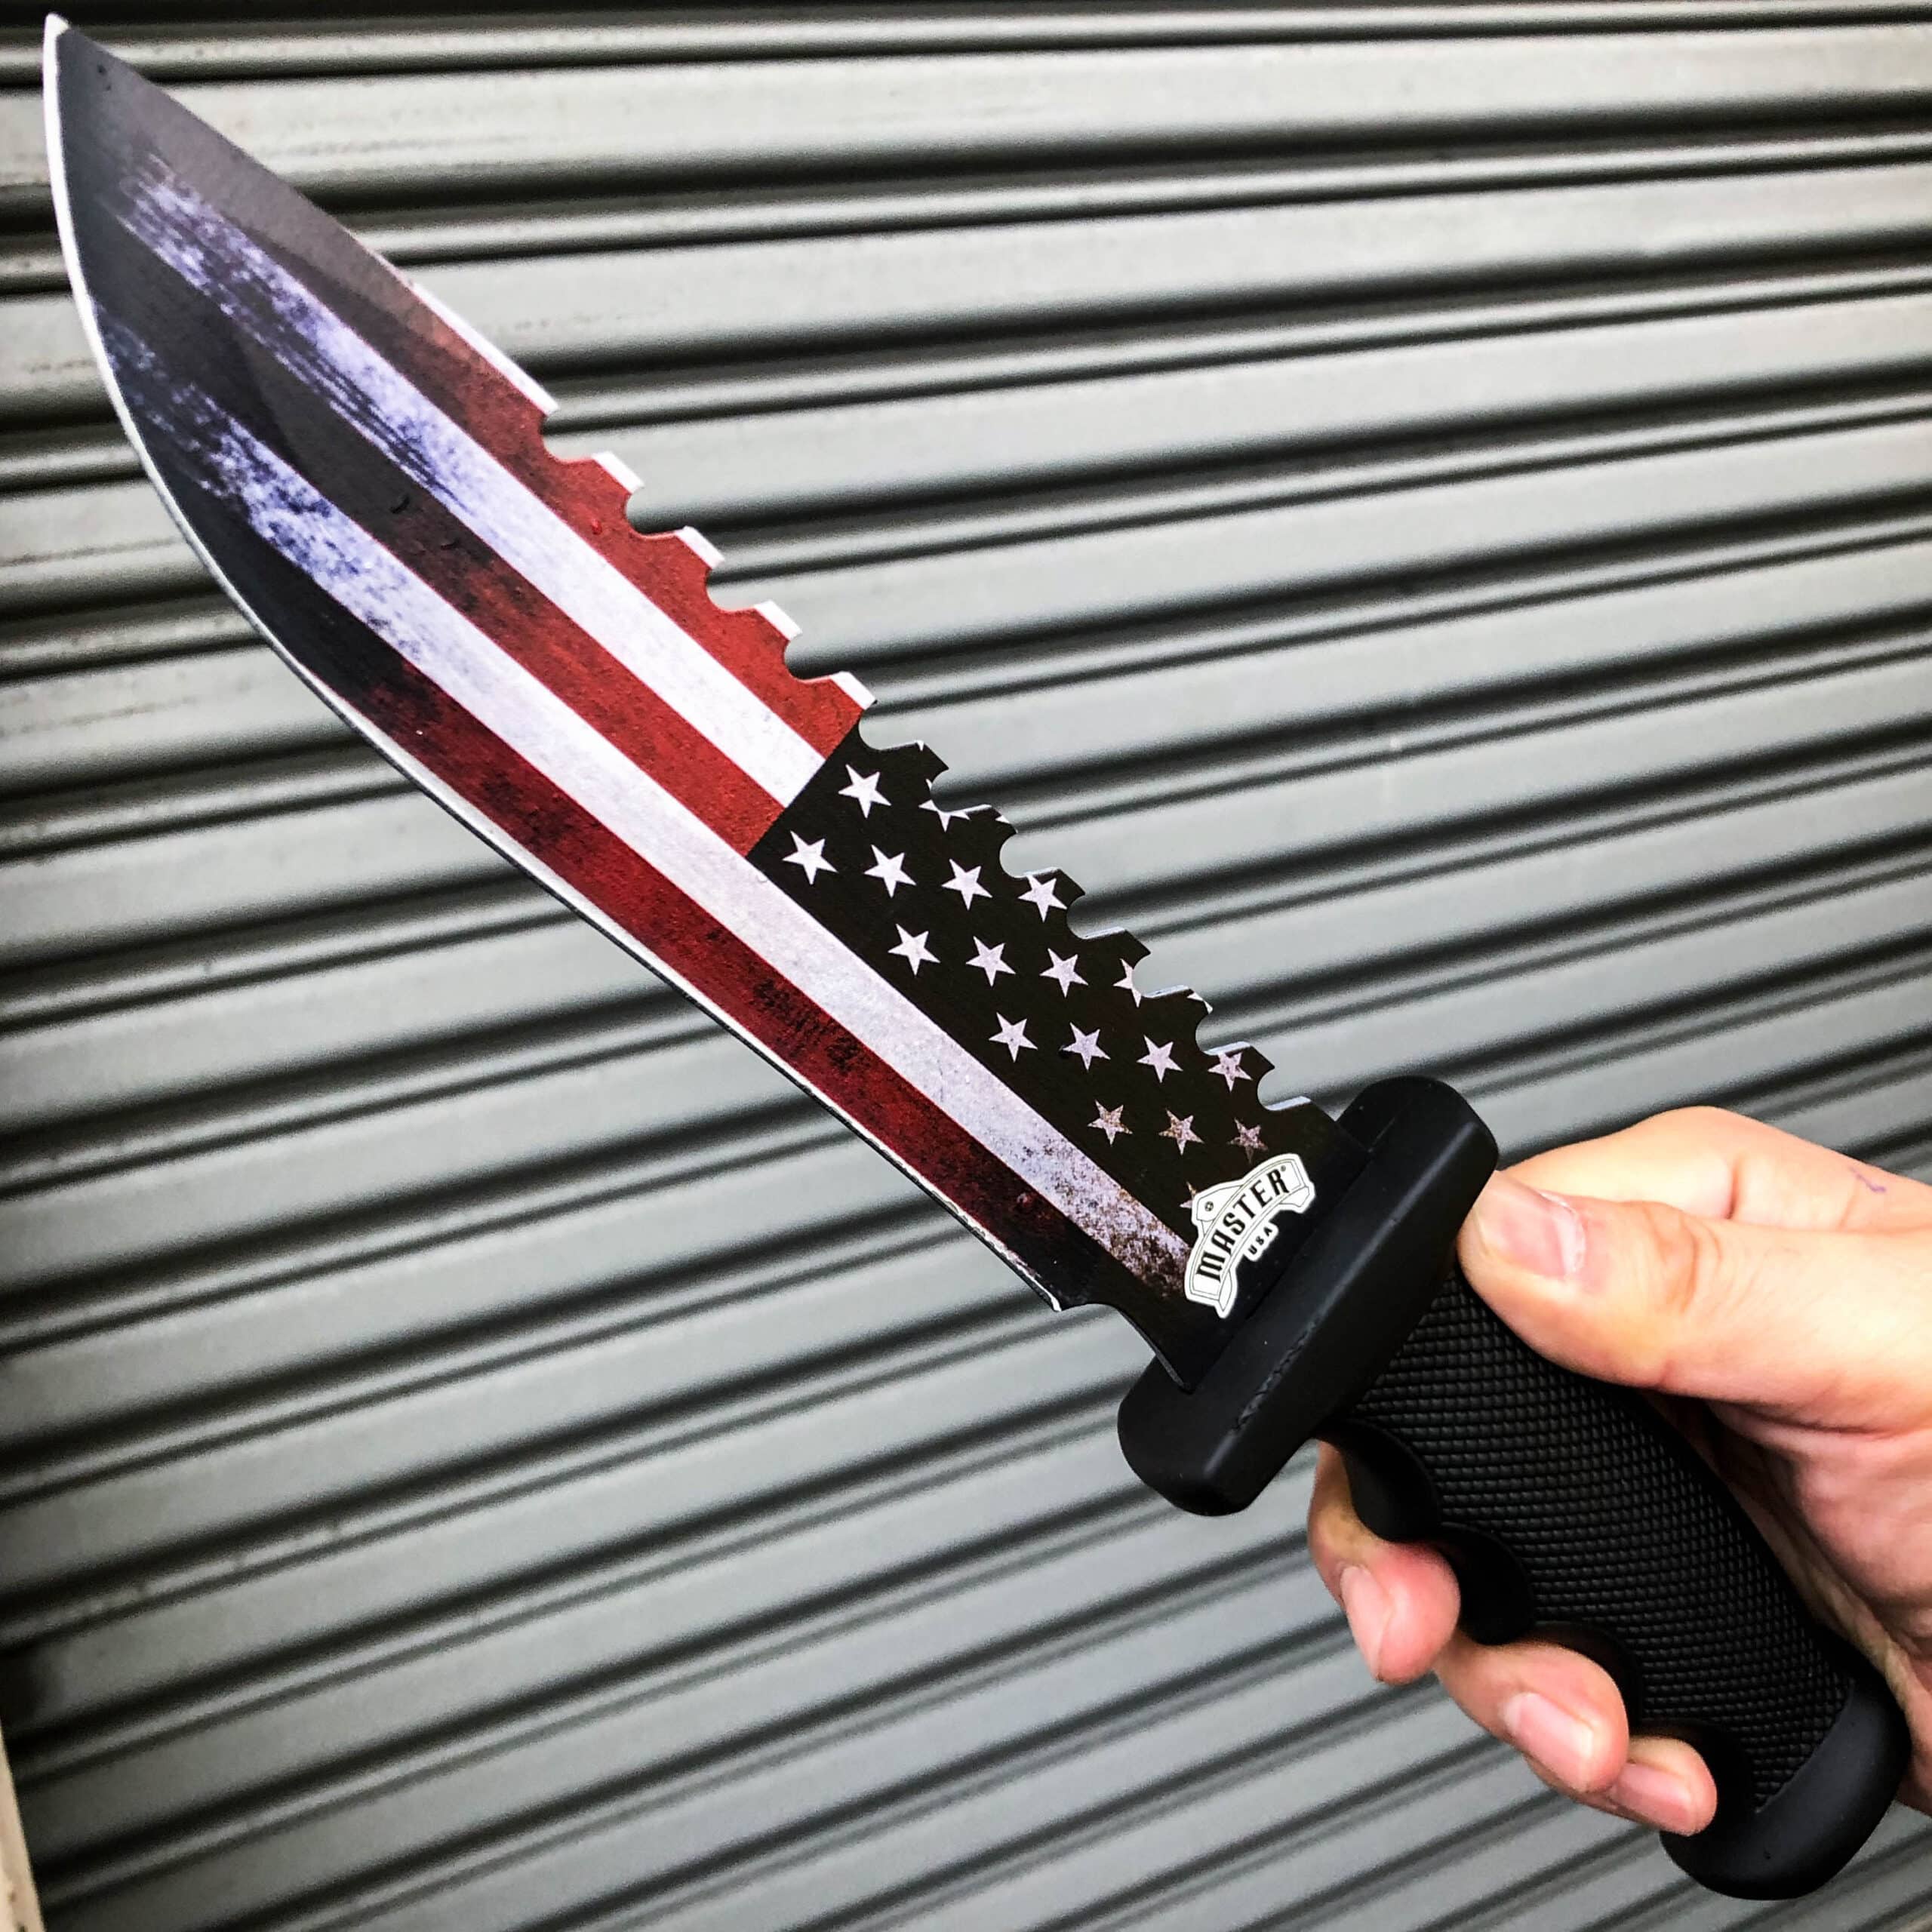 12.5 Military Tactical AMERICAN FLAG Fixed Blade Bowie Knife w/ Sheath NEW